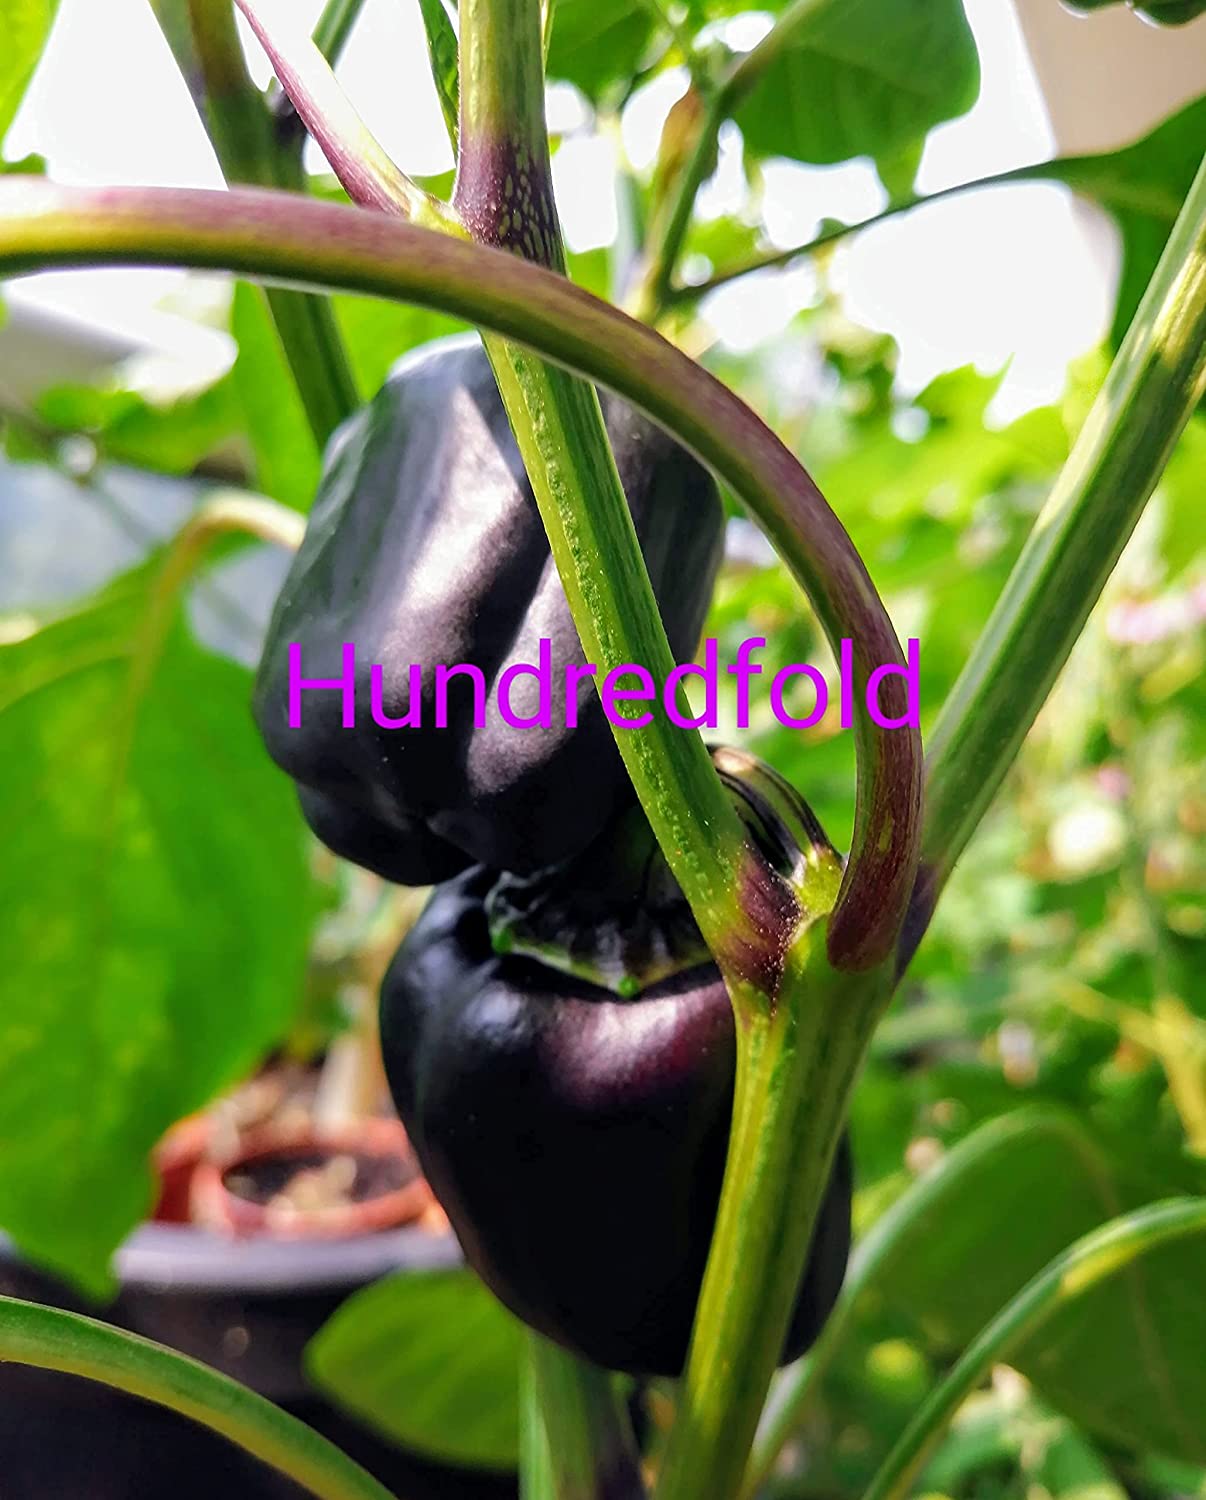 Hundredfold Organic Purple Beauty Sweet Bell Pepper 30 Vegetable Seeds - Capsicum annuum Non-GMO, Container & Raised Bed, Grow Your Own Food, Packed and Shipped in Canada